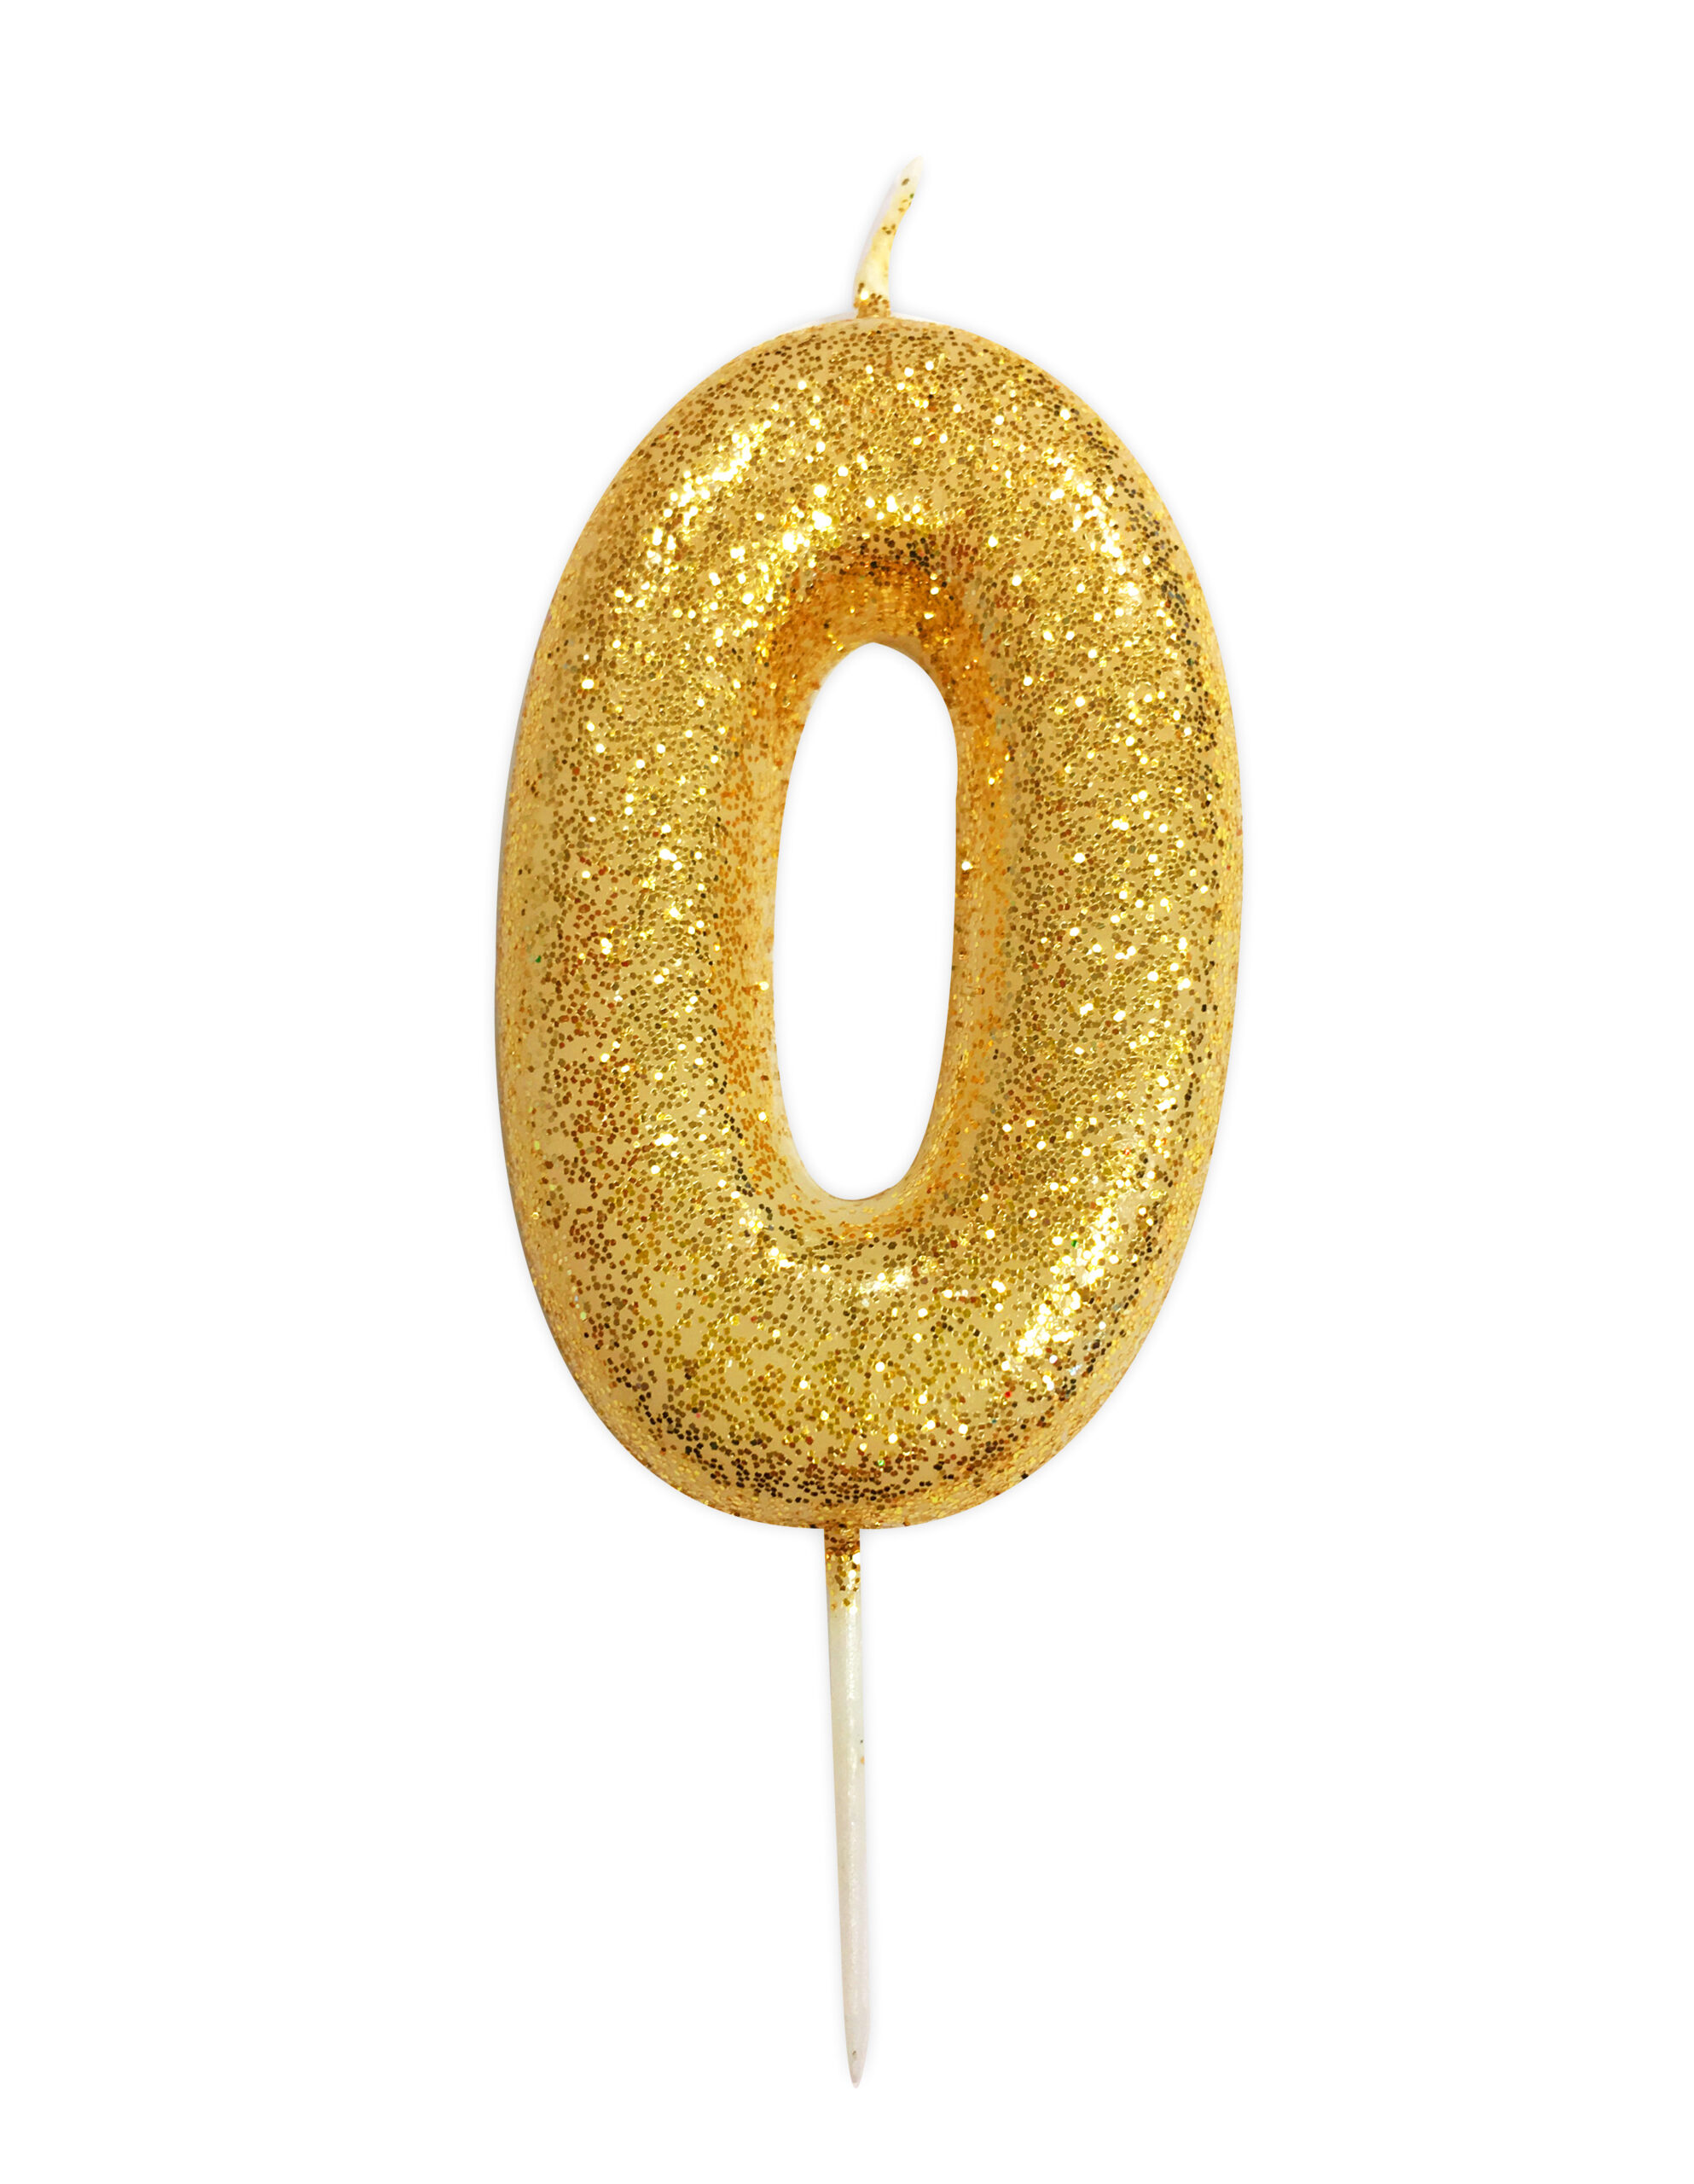 Gold number 0 glitter candle